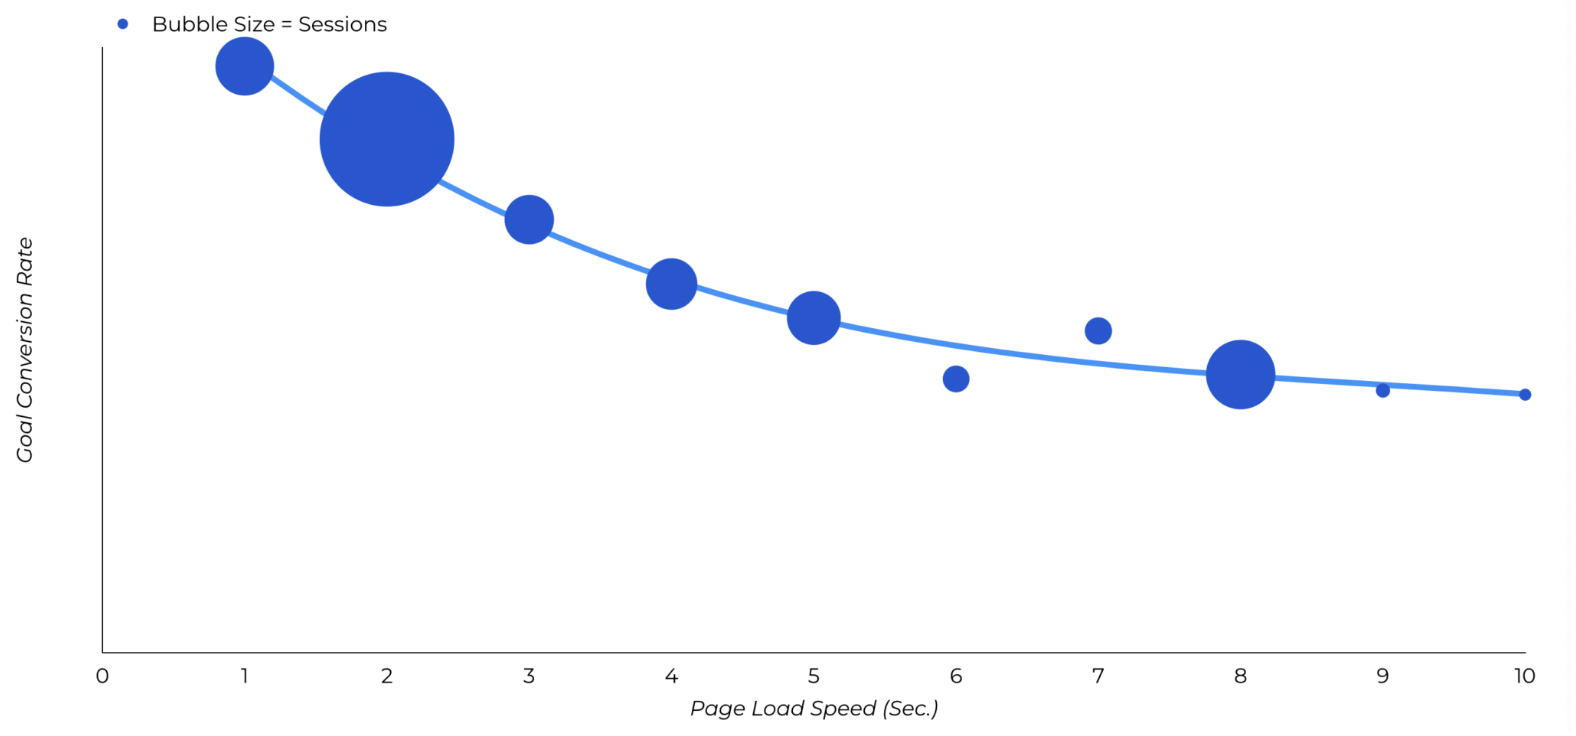  Portent page load speed / conversion rates